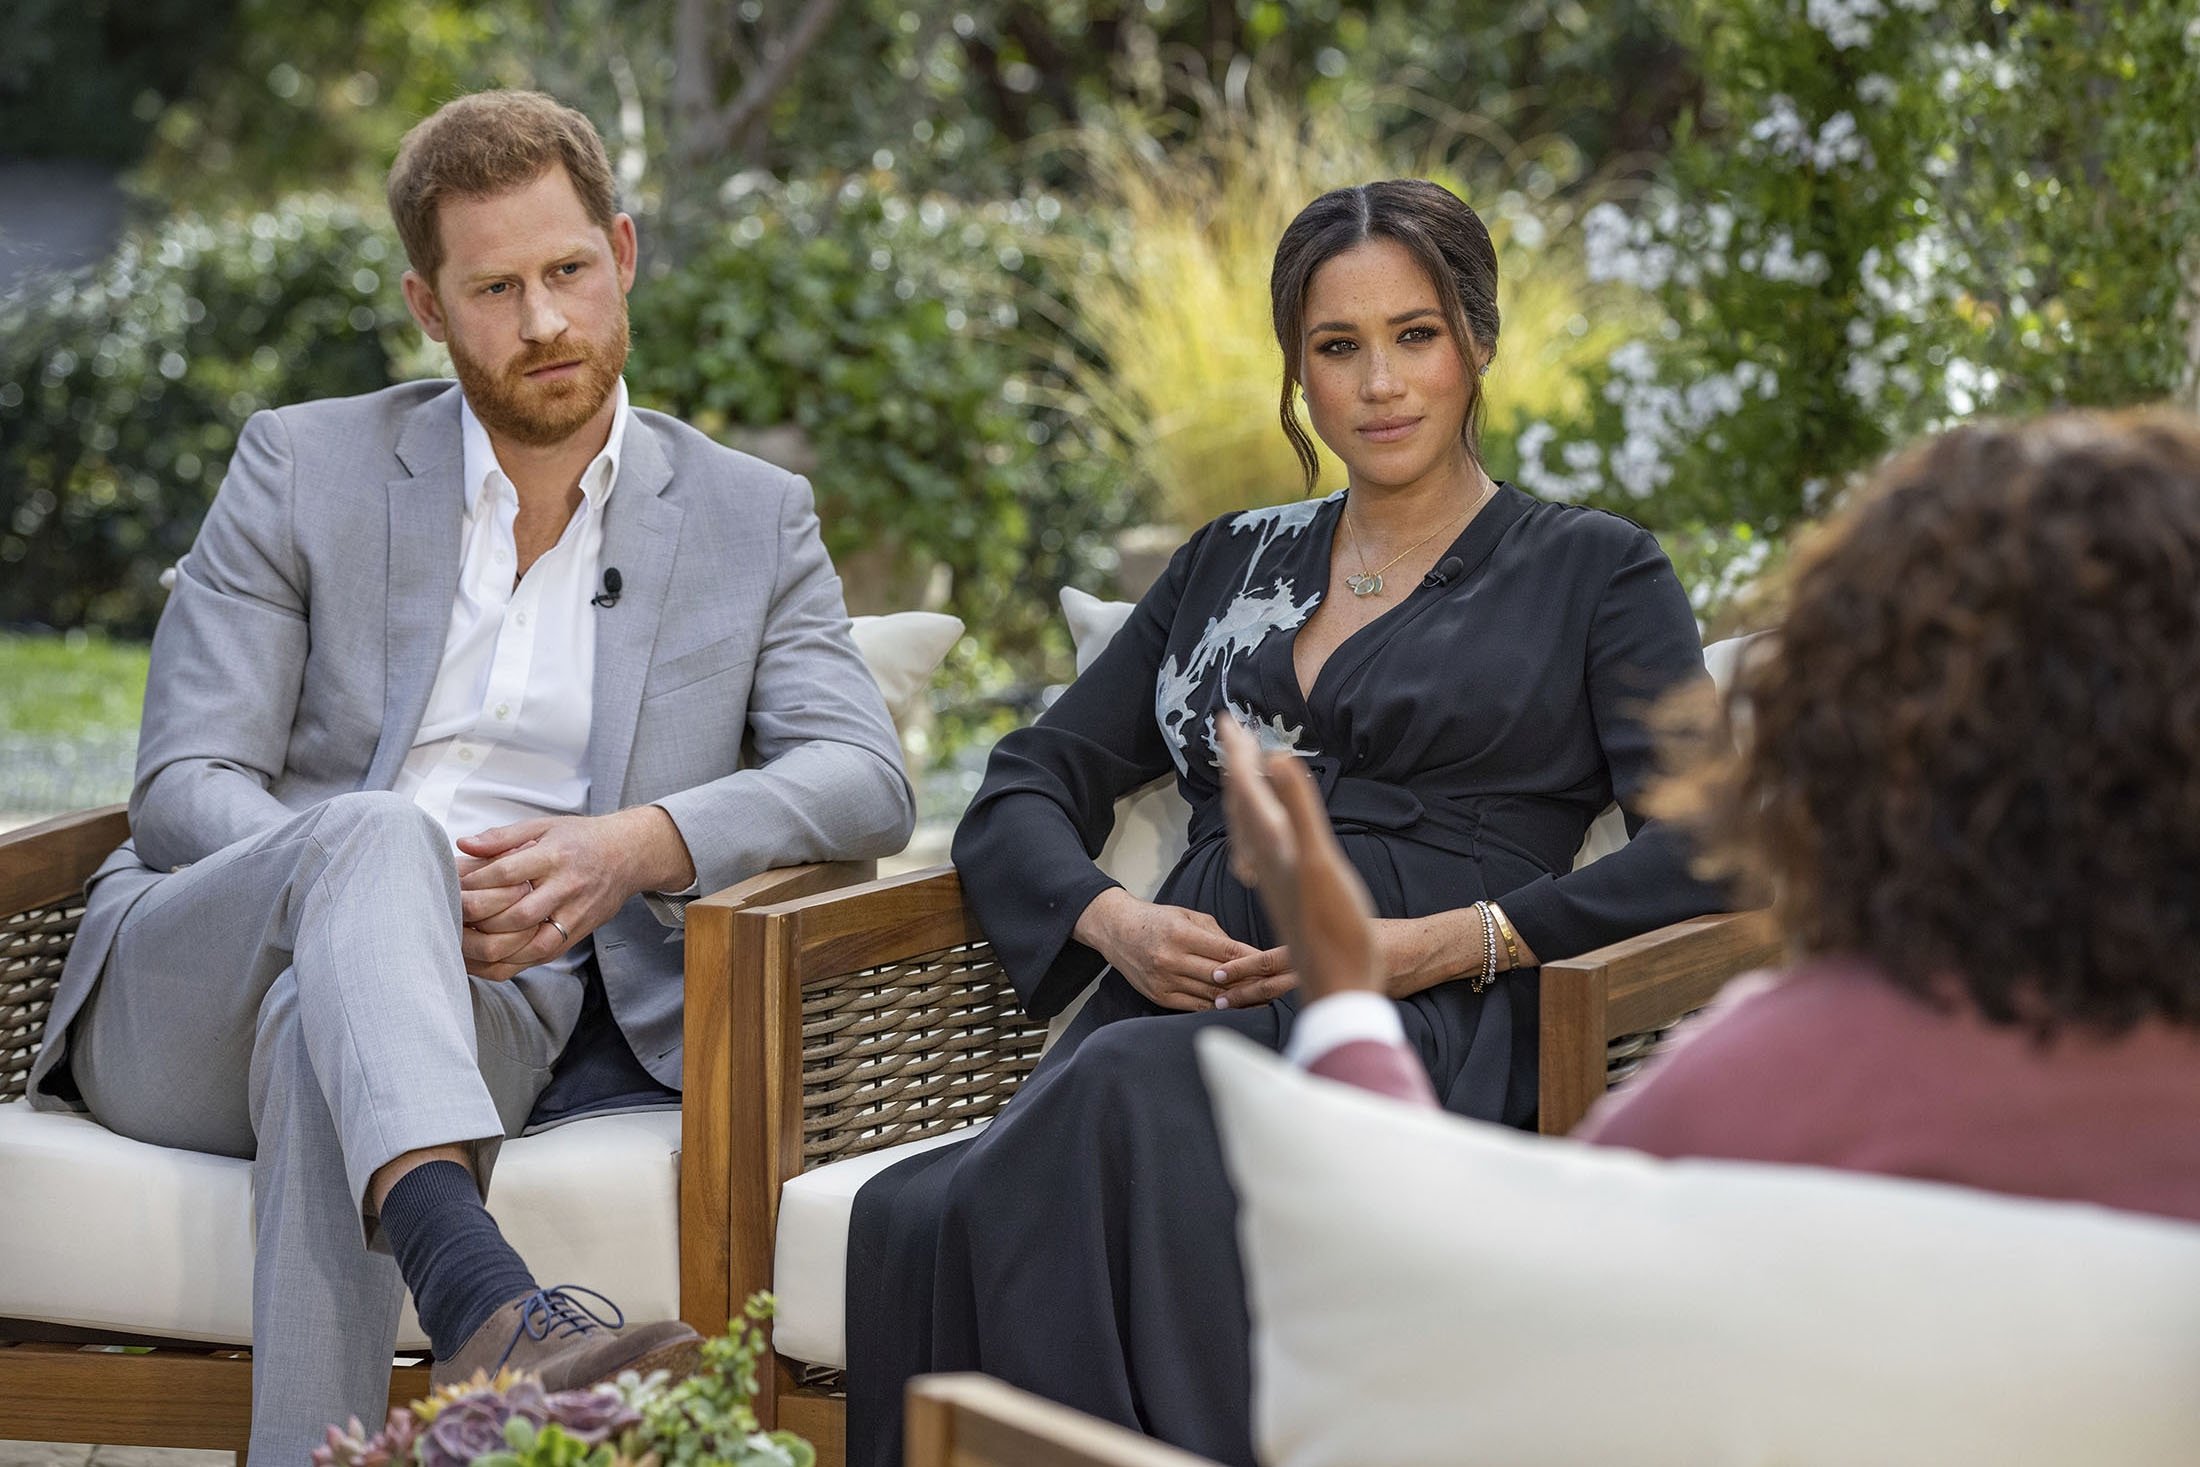 Prince Harry (L) and Meghan (C), Duchess of Sussex, during an interview with Oprah Winfrey. (Harpo Productions via AP)